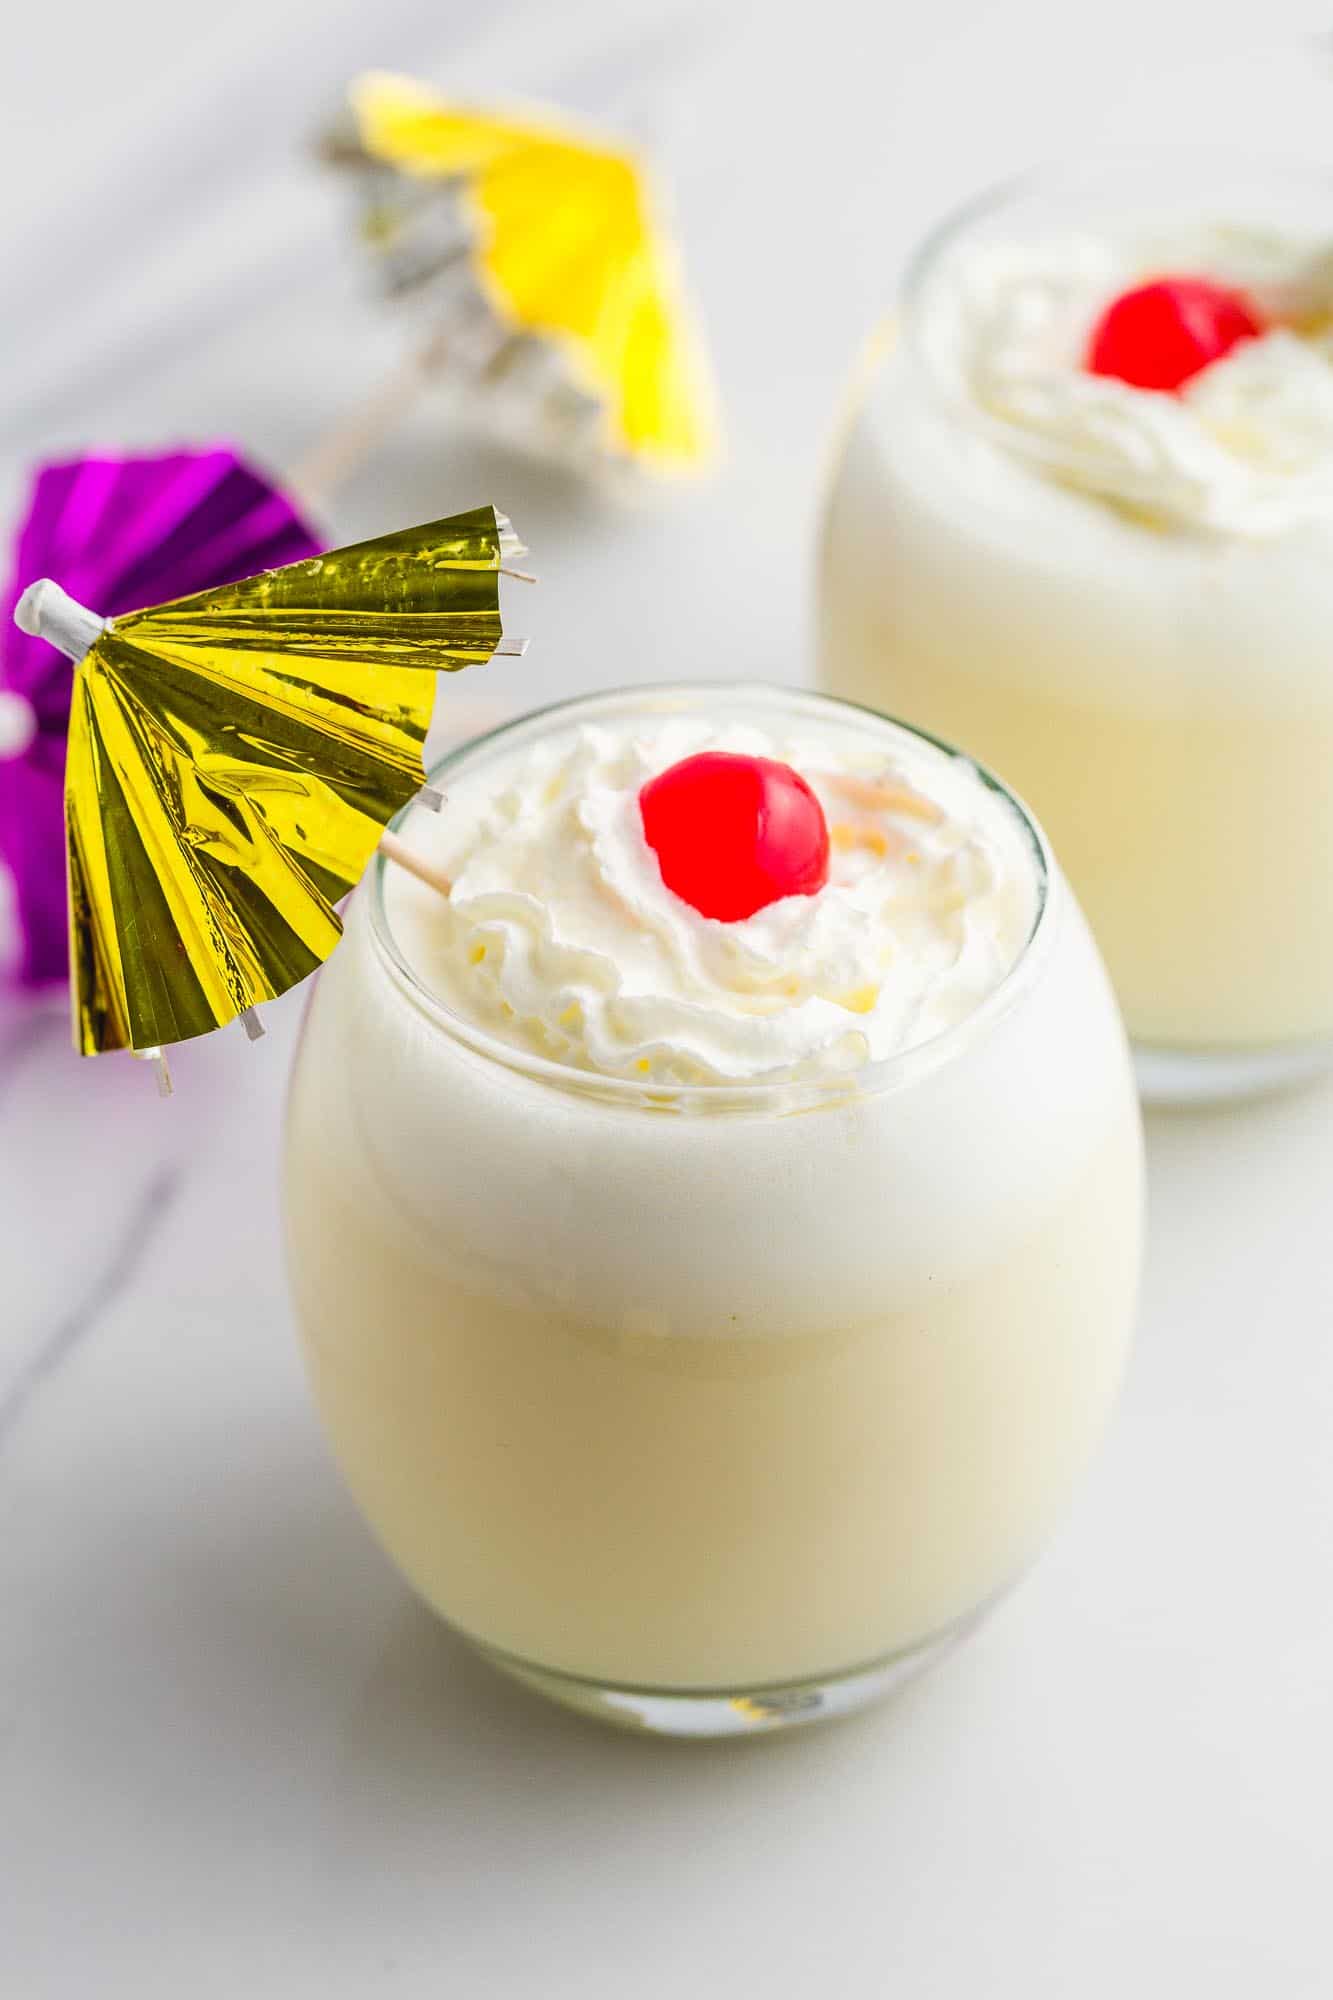 Two glasses of Piña Colada with whipped cream, maraschino cherries and cocktail umbrellas